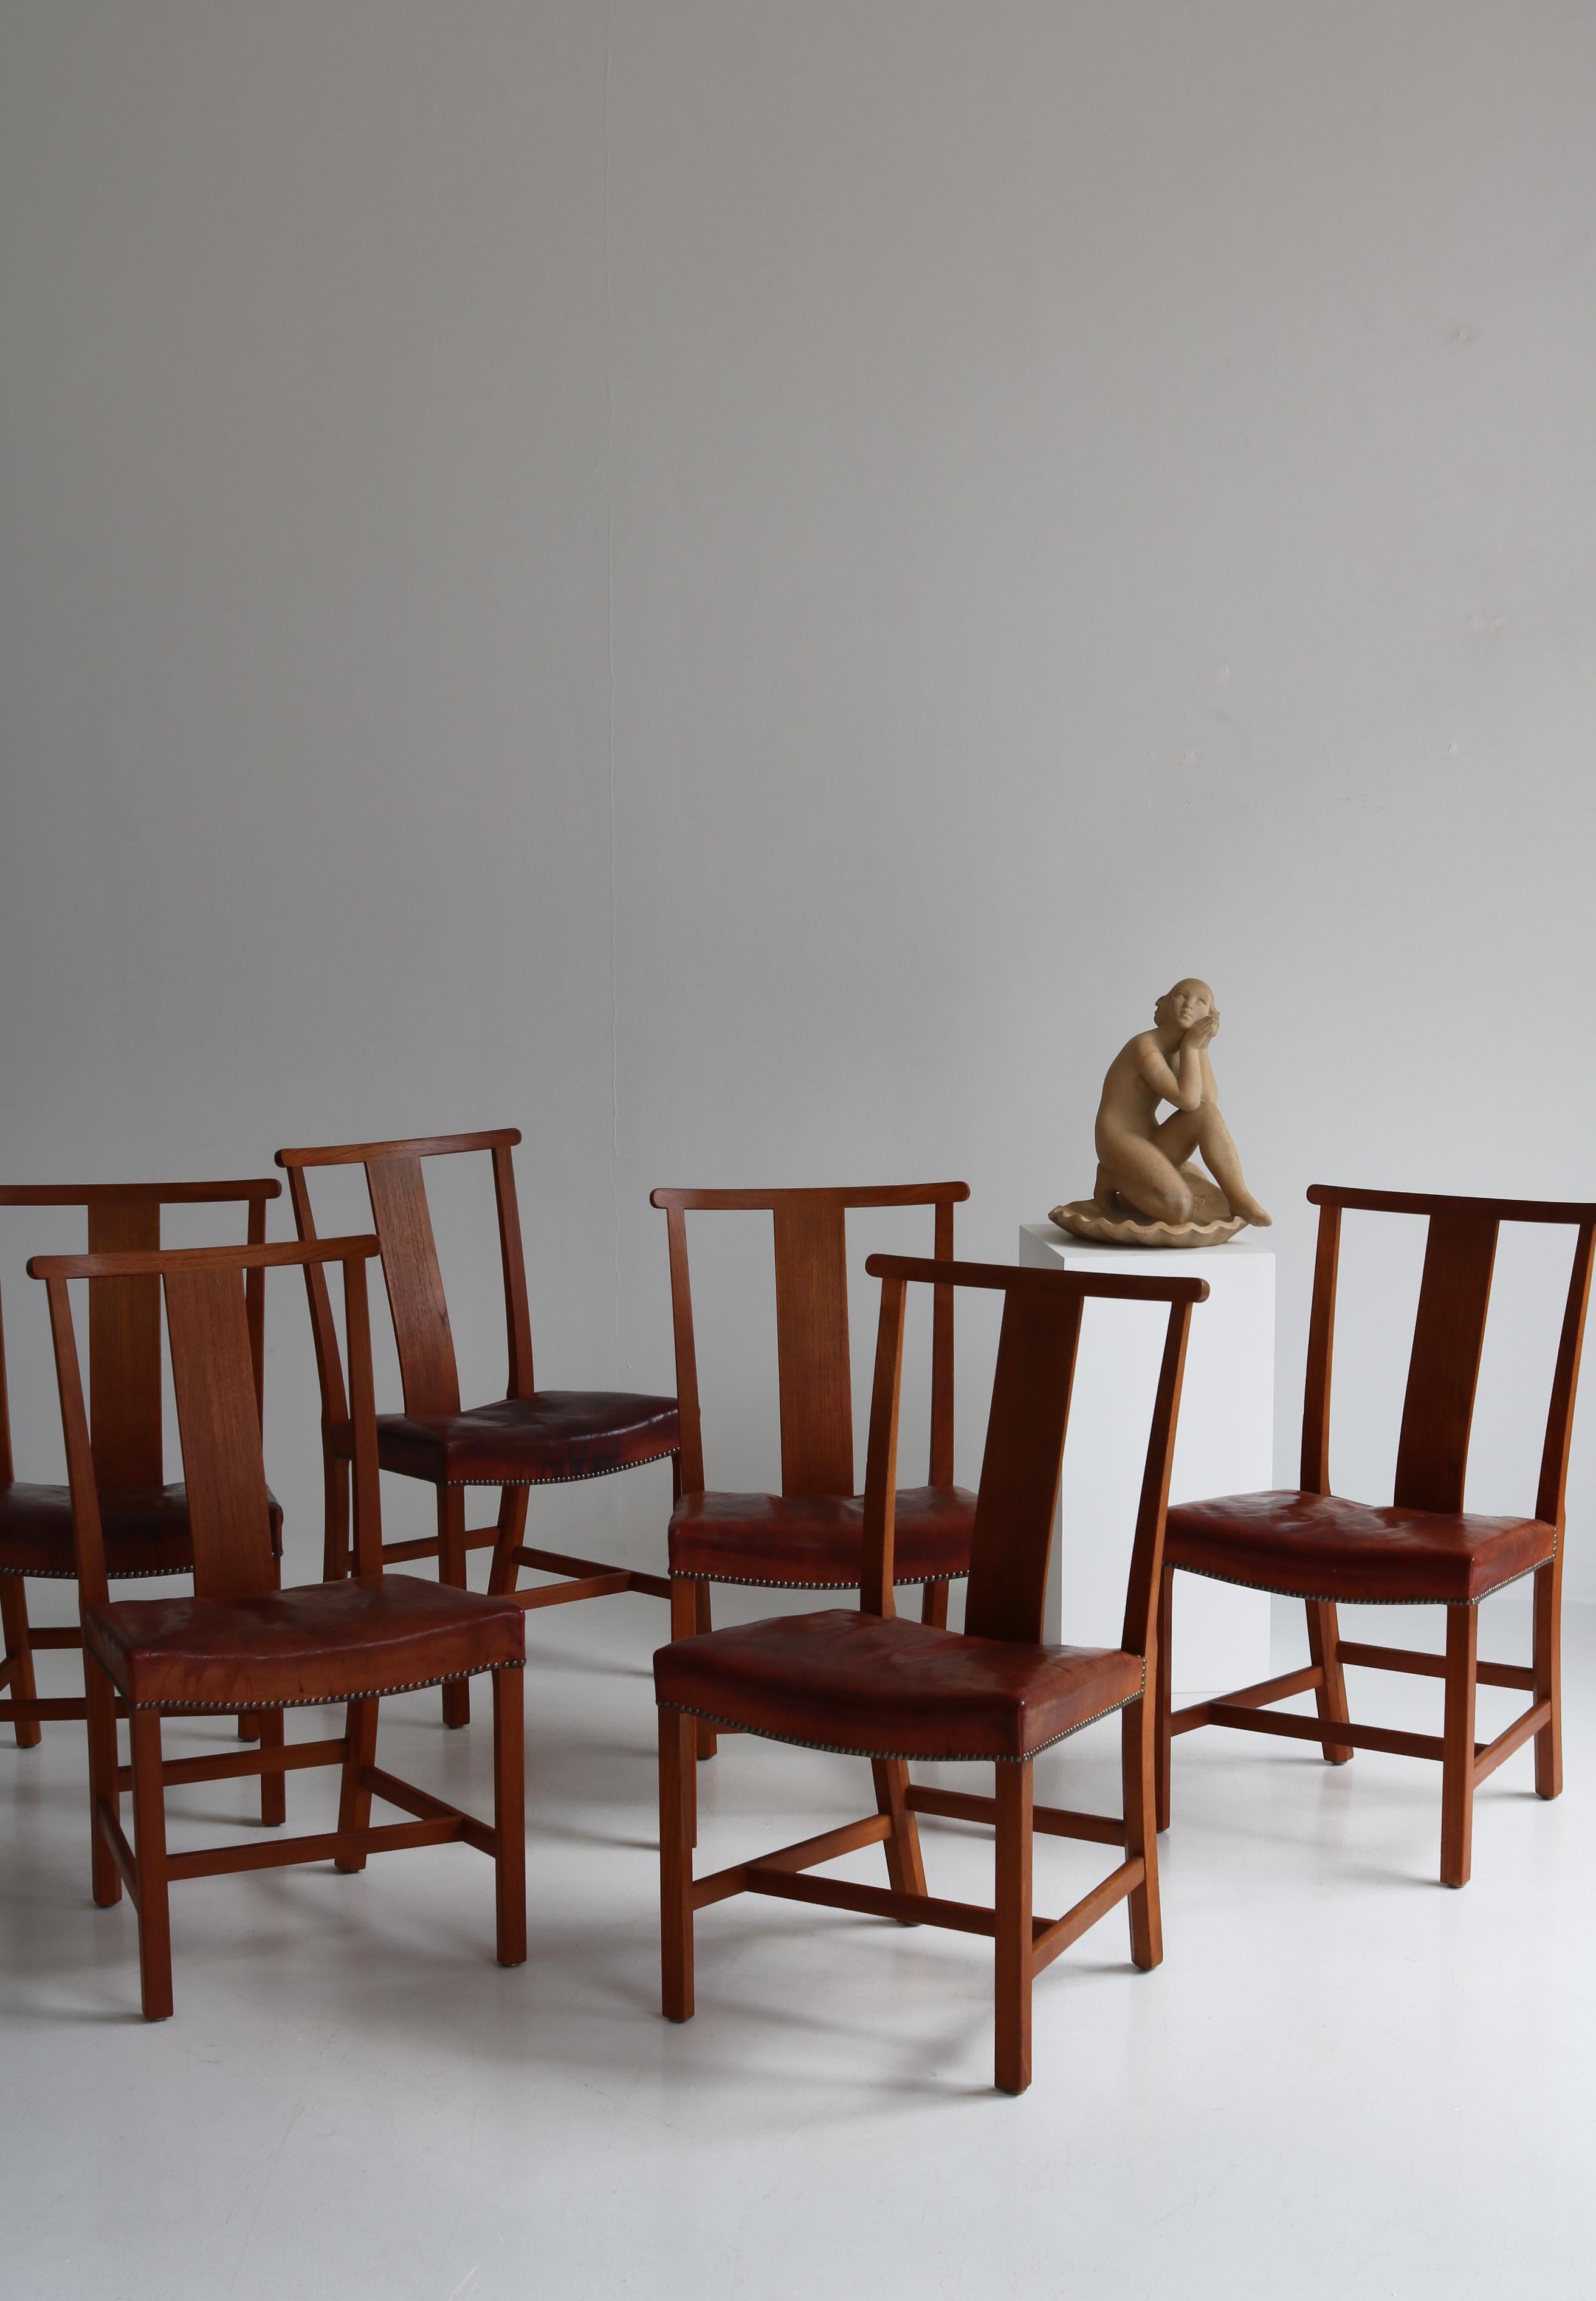 A very rare and important set of six teakwood dining chairs designed by Børge Mogensen and made by cabinetmaker Ove Lander, Denmark in 1939. Seat upholstered with original patinated Niger leather, fitted with brass nails.
This is one of the very